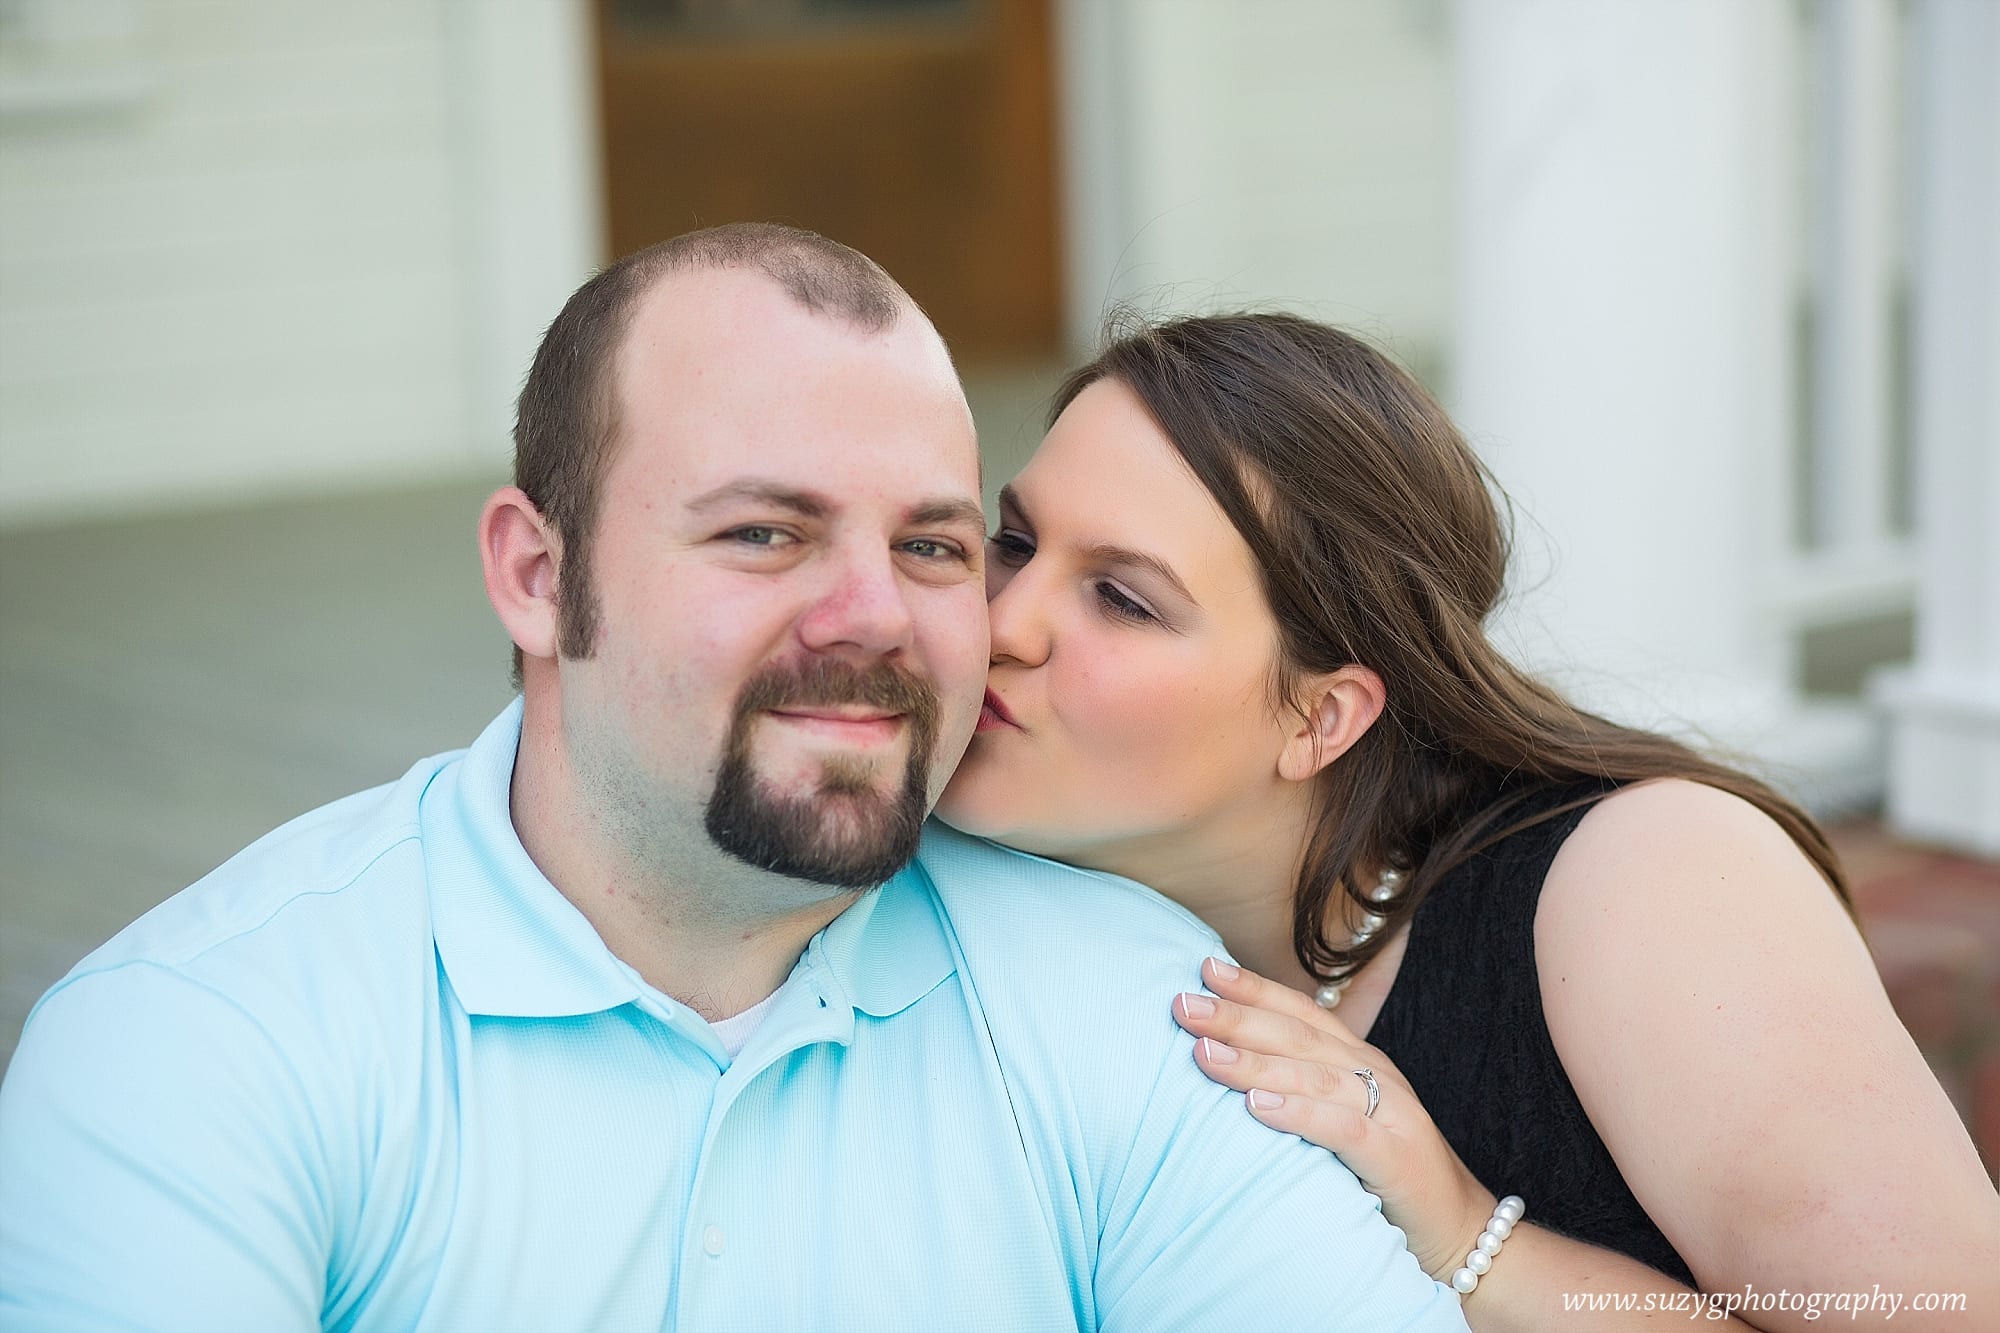 engagements-new orleans-texas-baton rouge-lake charles-suzy g-photography-suzygphotography_0028